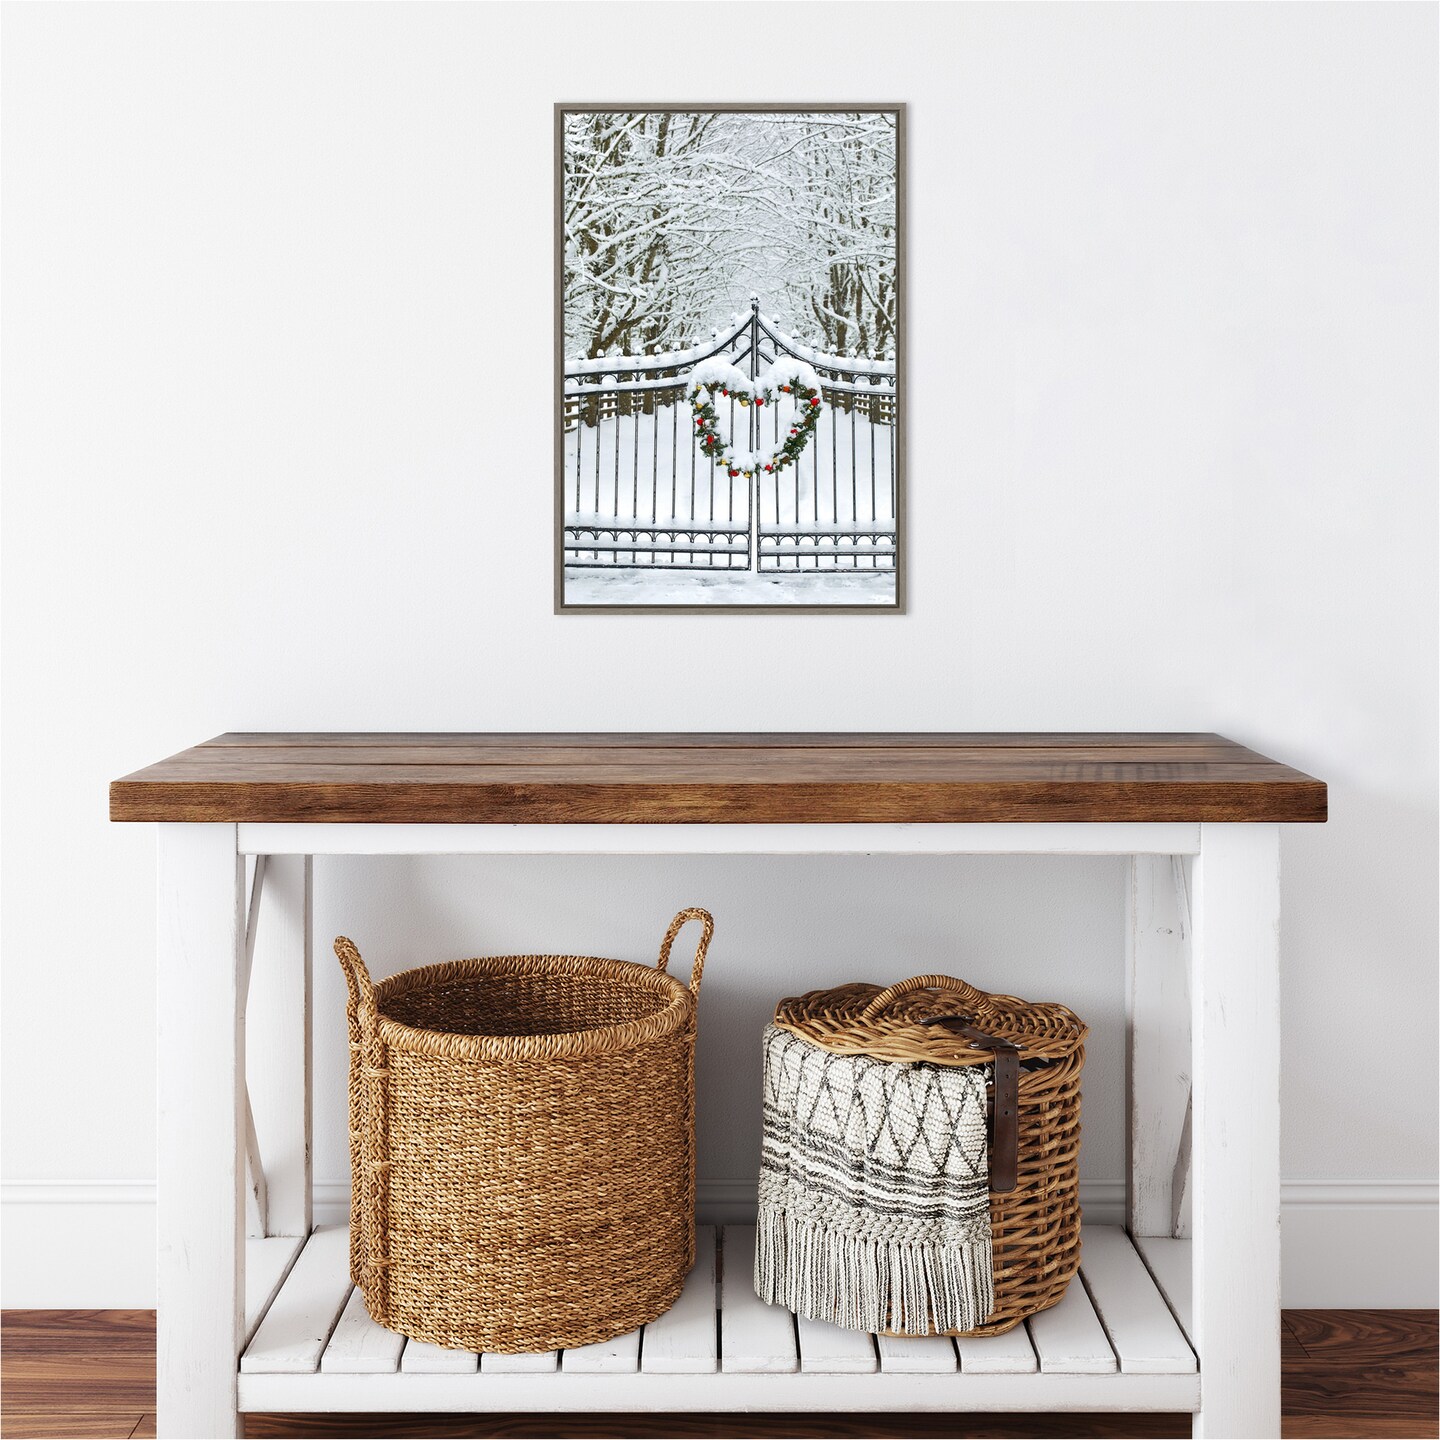 Christmas Wreath and Snow Covered Gate by Darrell Gulin Danita Delimont 16-in. W x 23-in. H. Canvas Wall Art Print Framed in Grey